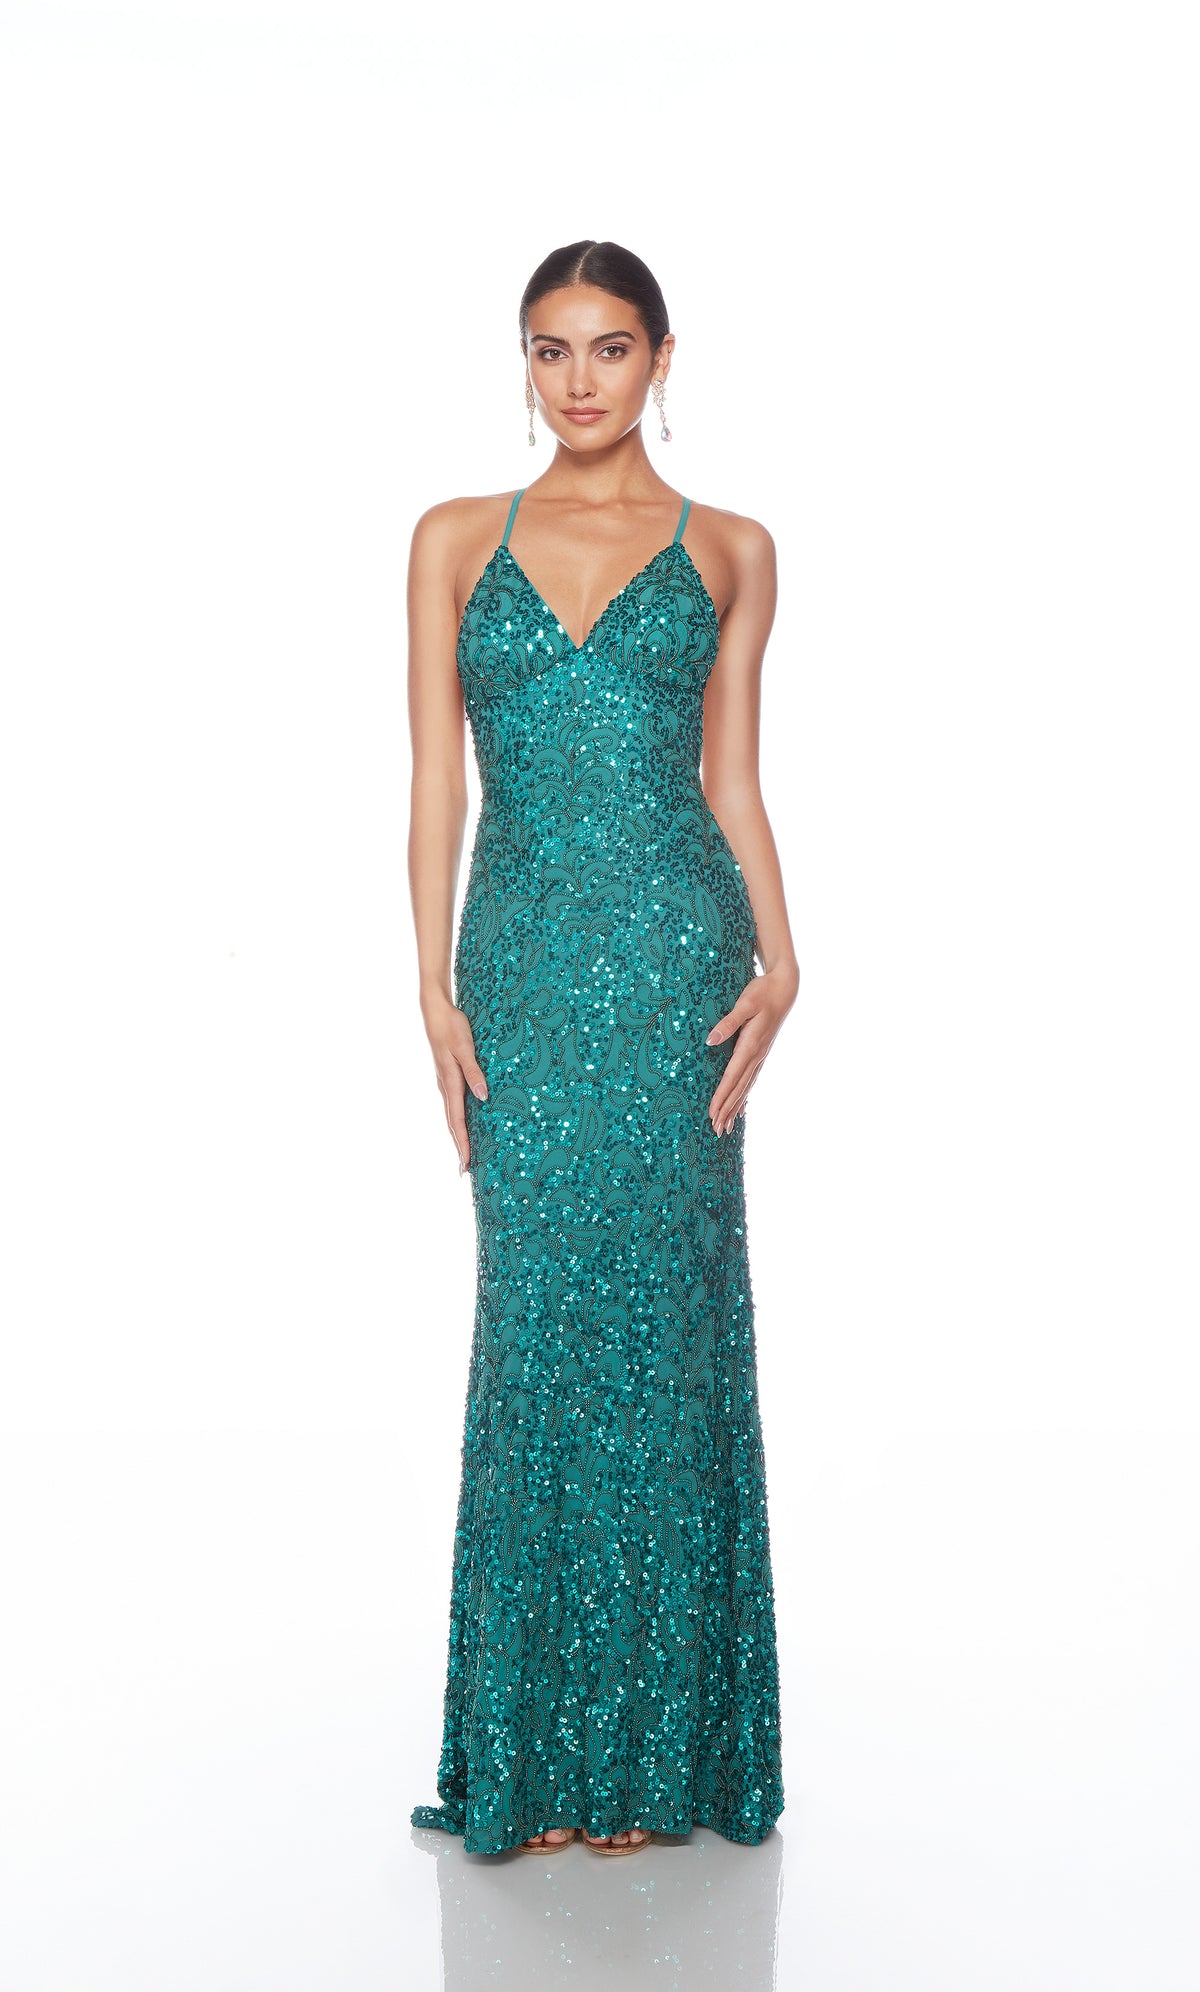 Elegant jade formal gown: Hand-beaded, V neckline, spaghetti straps, strappy back, and intricate design plus fringe accents for an chic and sophisticated look.